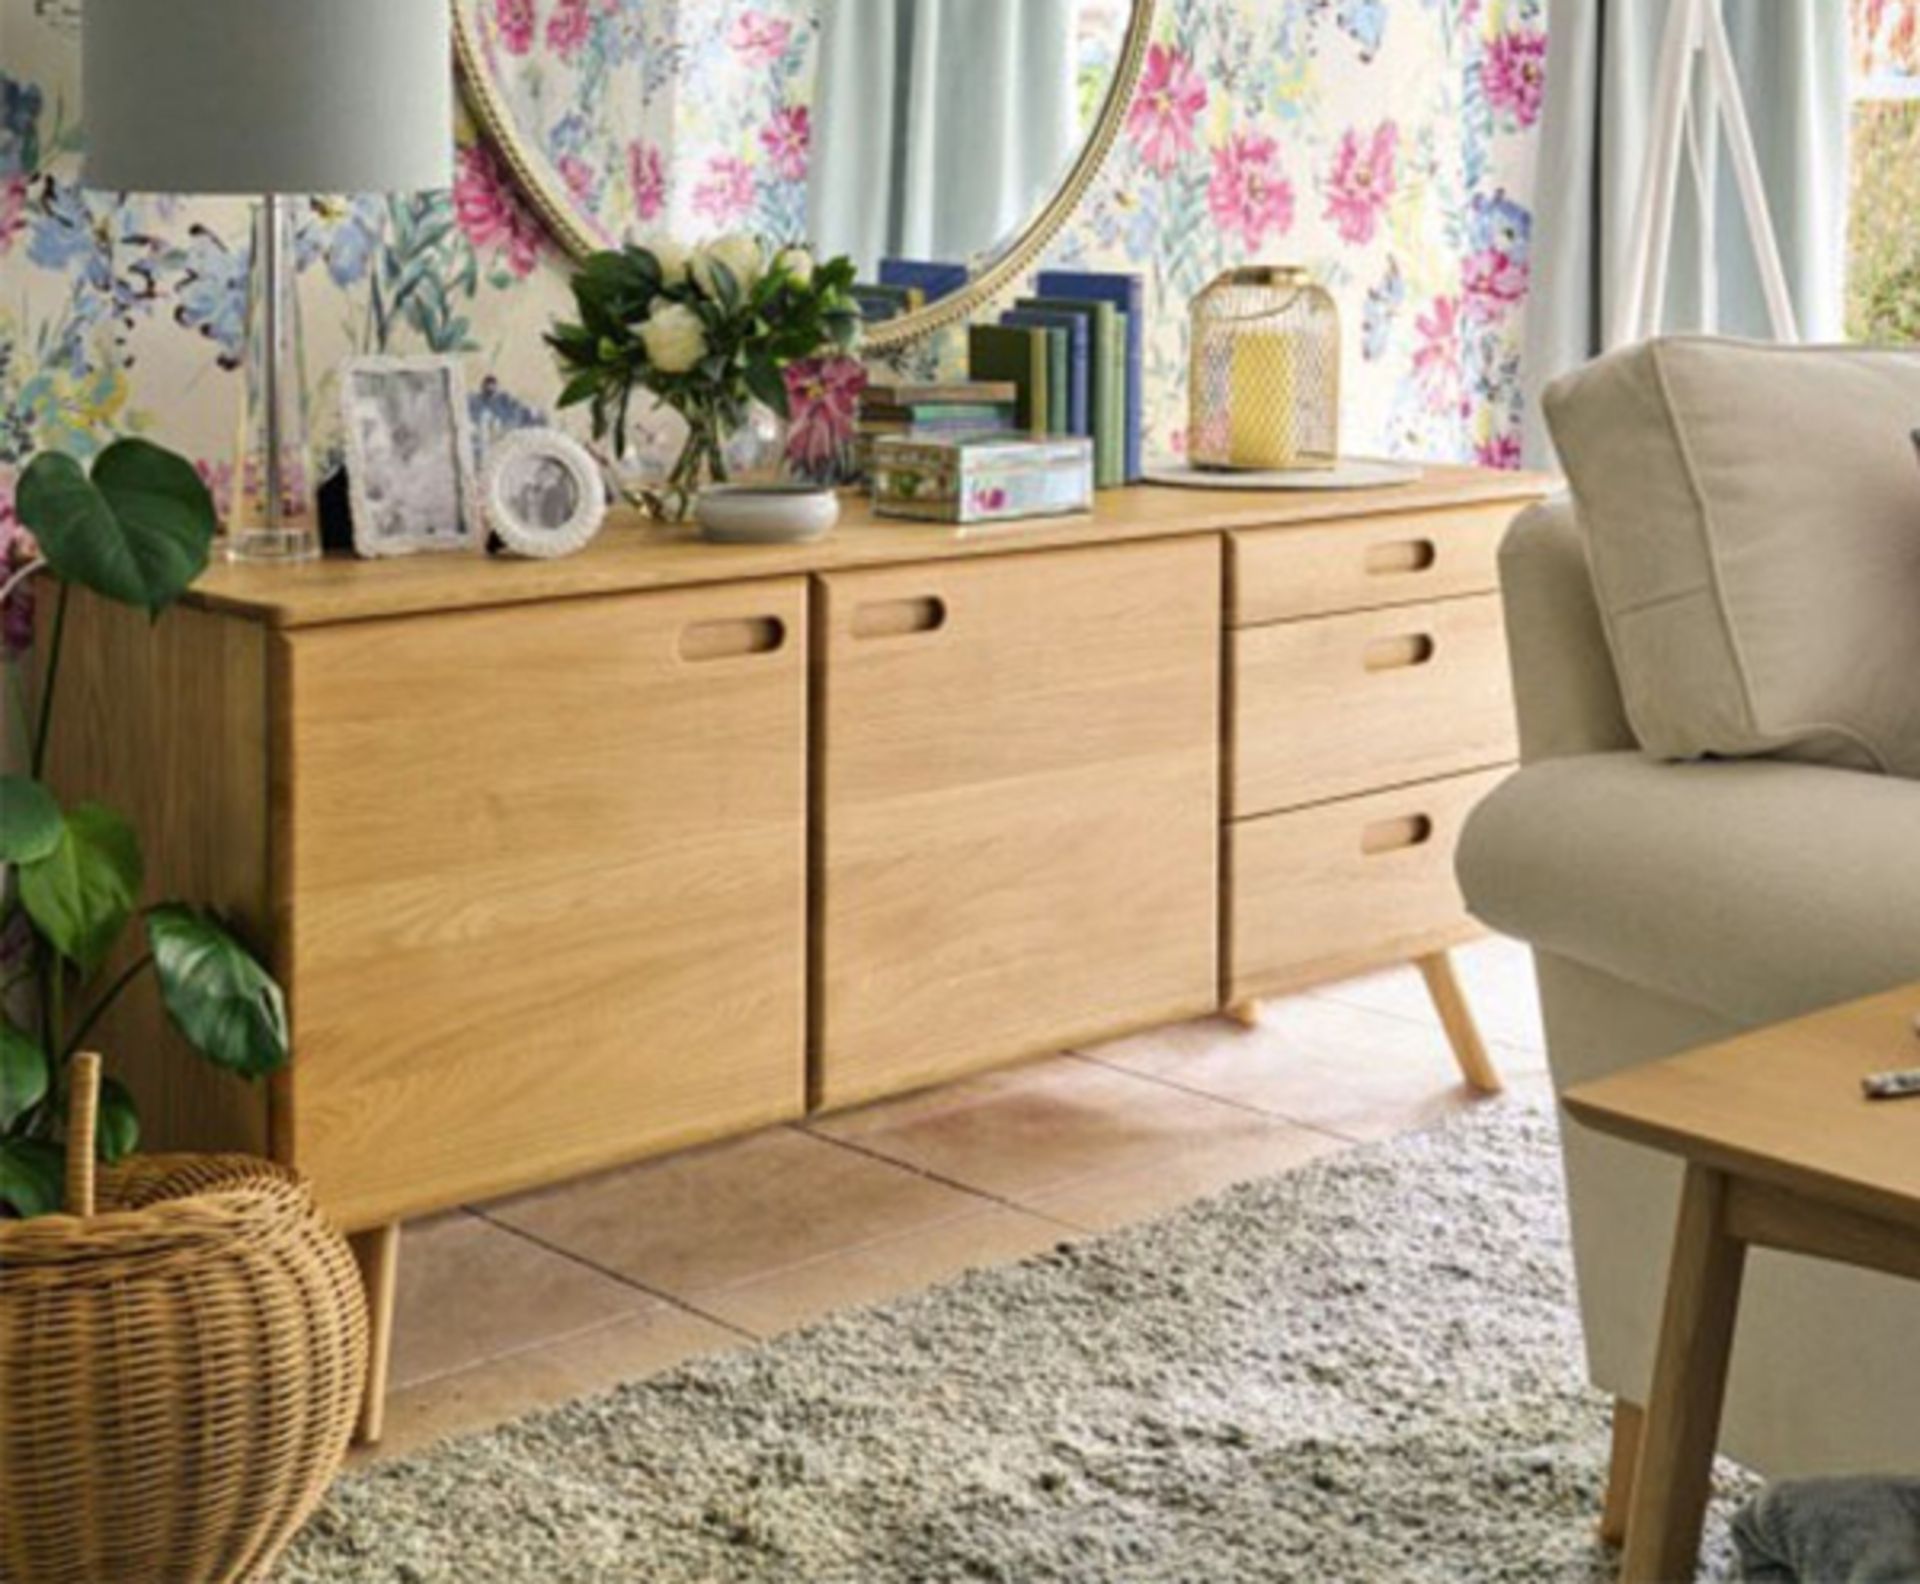 Laura Ashley Hazlemere 2 Door 3 Drawer Sideboard Taking Inspiration From The Iconic Furniture